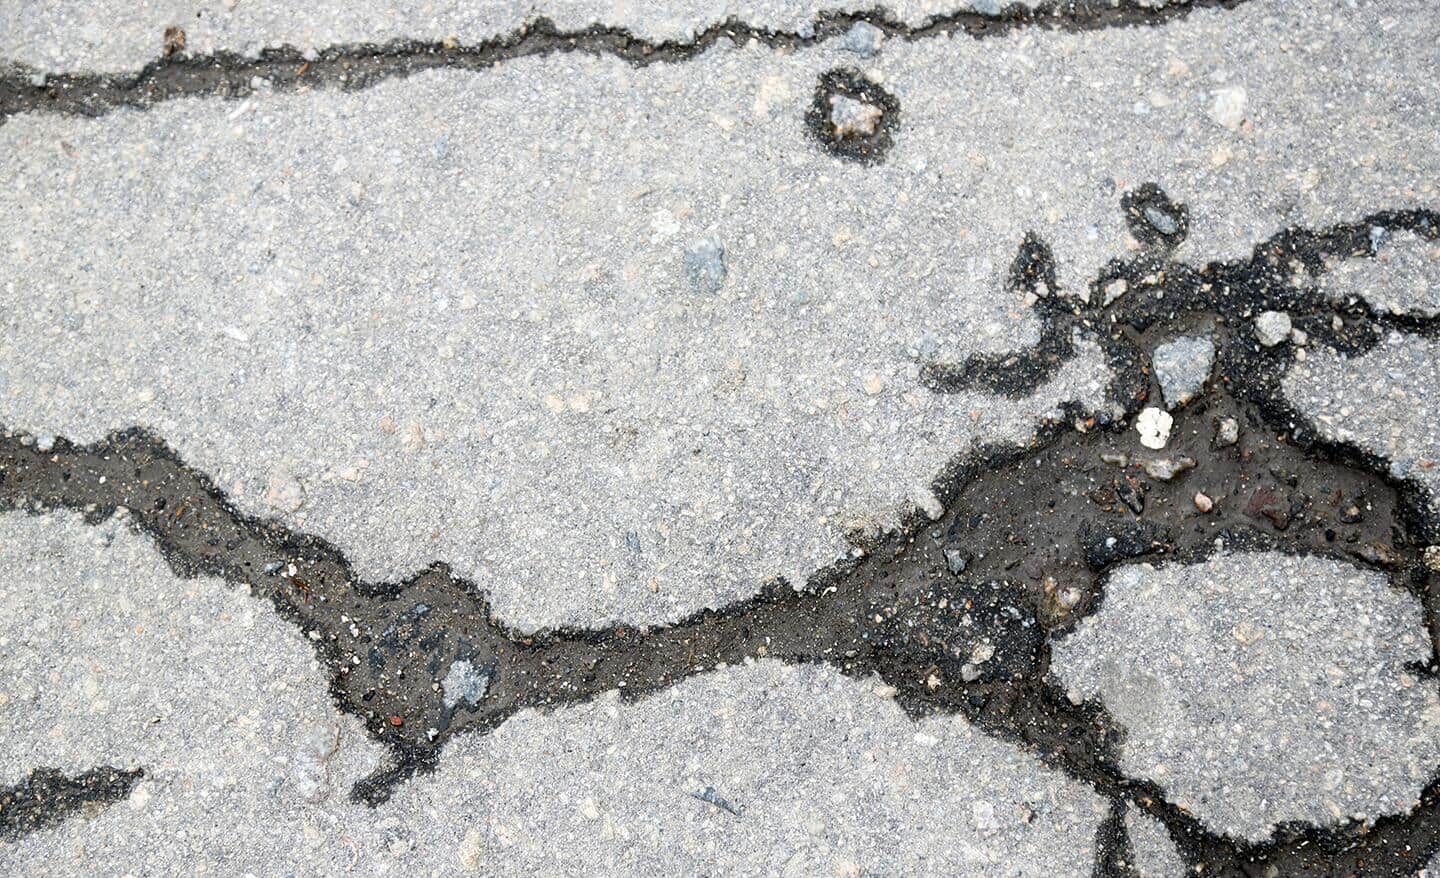 Large cracks in a concrete driveway.